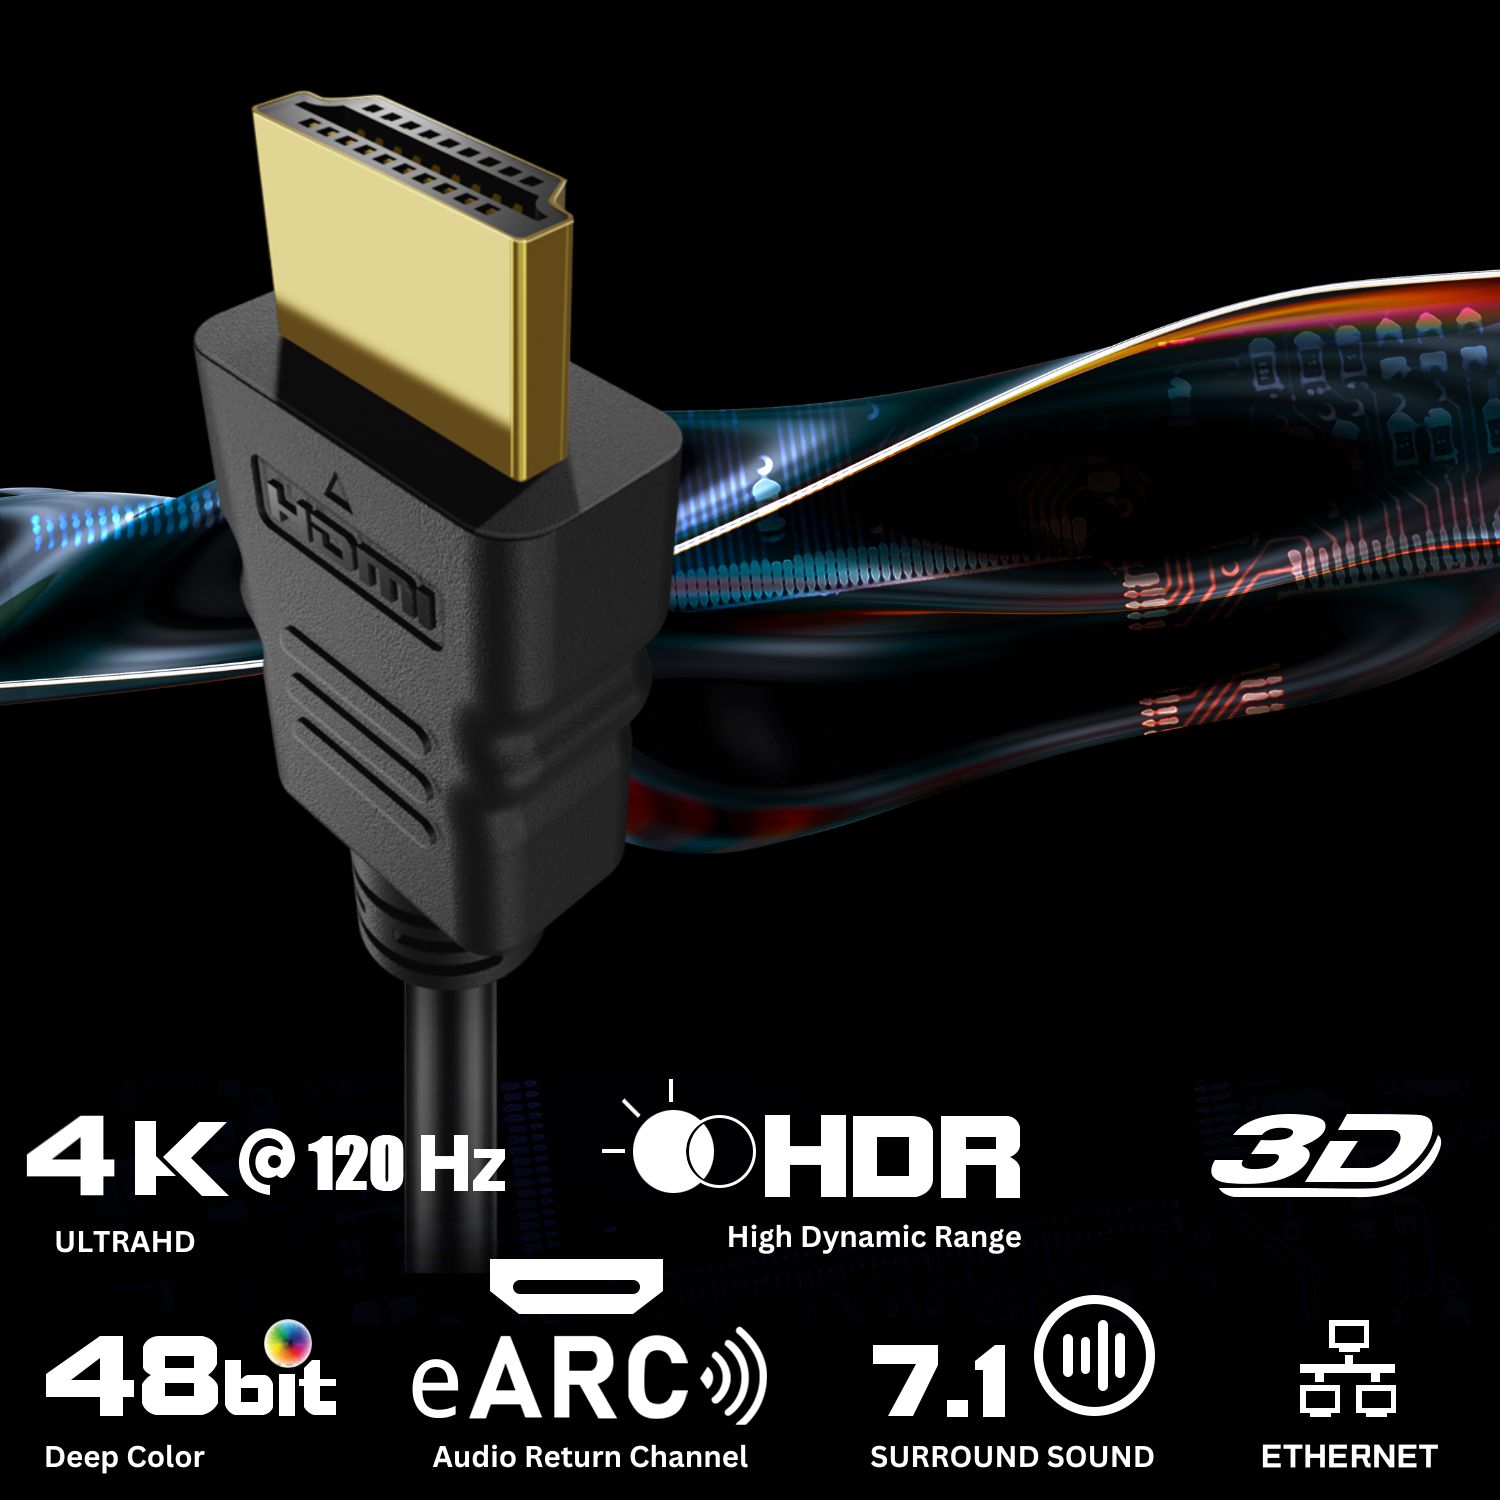 High Speed Performance - High Speed HDMI Cable provides 10.2 gbps / 340 MHz data transferring speed and up to 240hz Refresh Rates; Supports resolutions up to 4Kx2K (UHD), 4096x2160, 3840x2160, 2560x1600, 2560x1440, 1920x1200, and 1080p picture quality